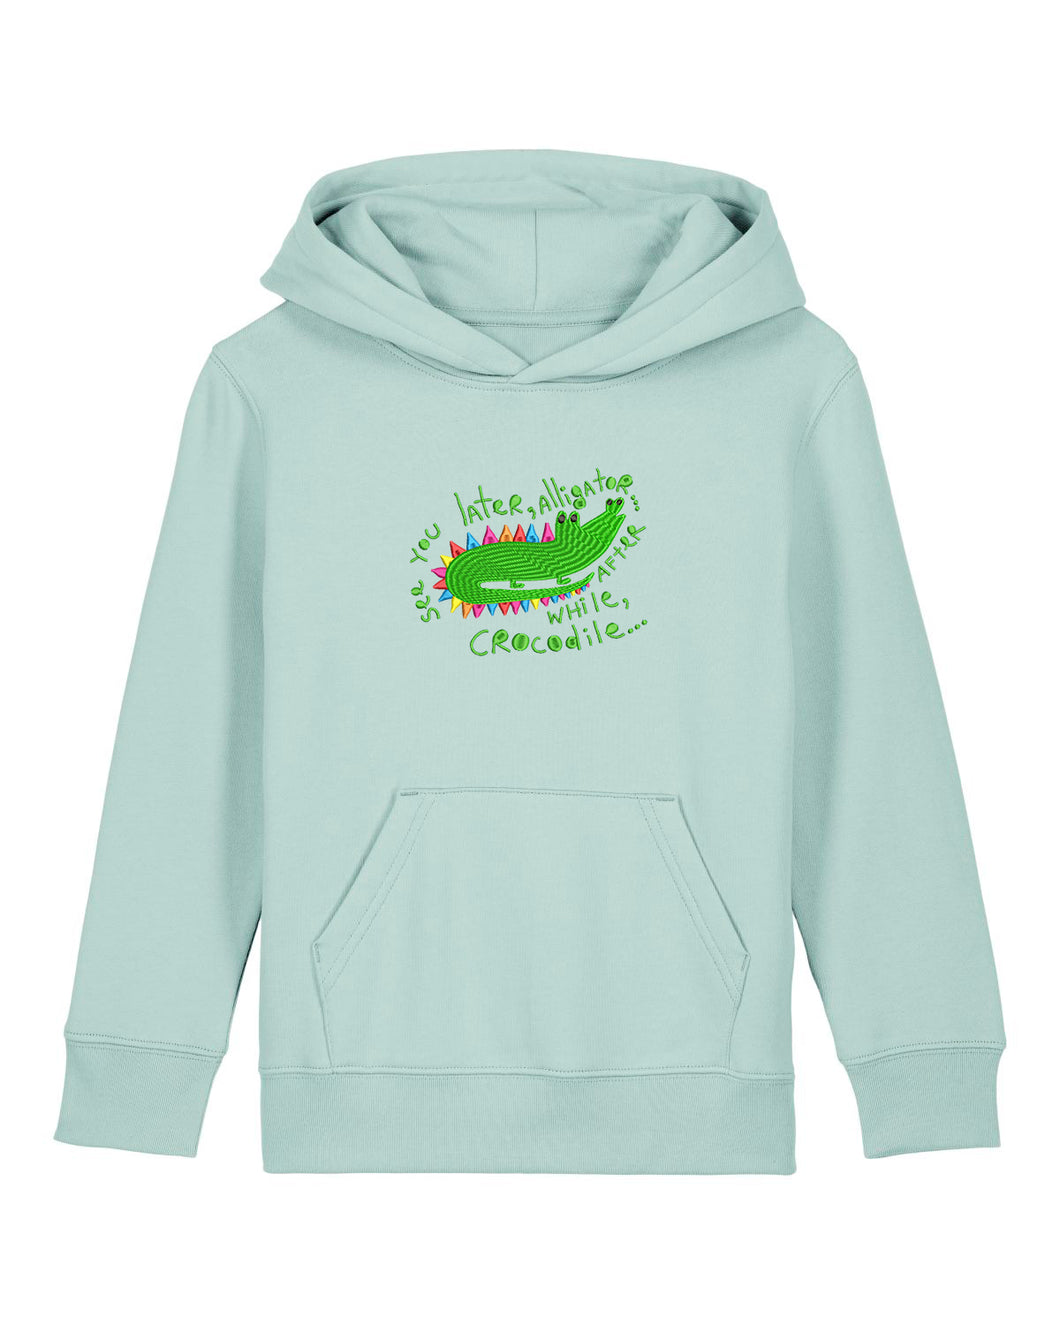 See you later, alligator...🐊- Embroidered UNISEX KIDS hoodie (Copy)